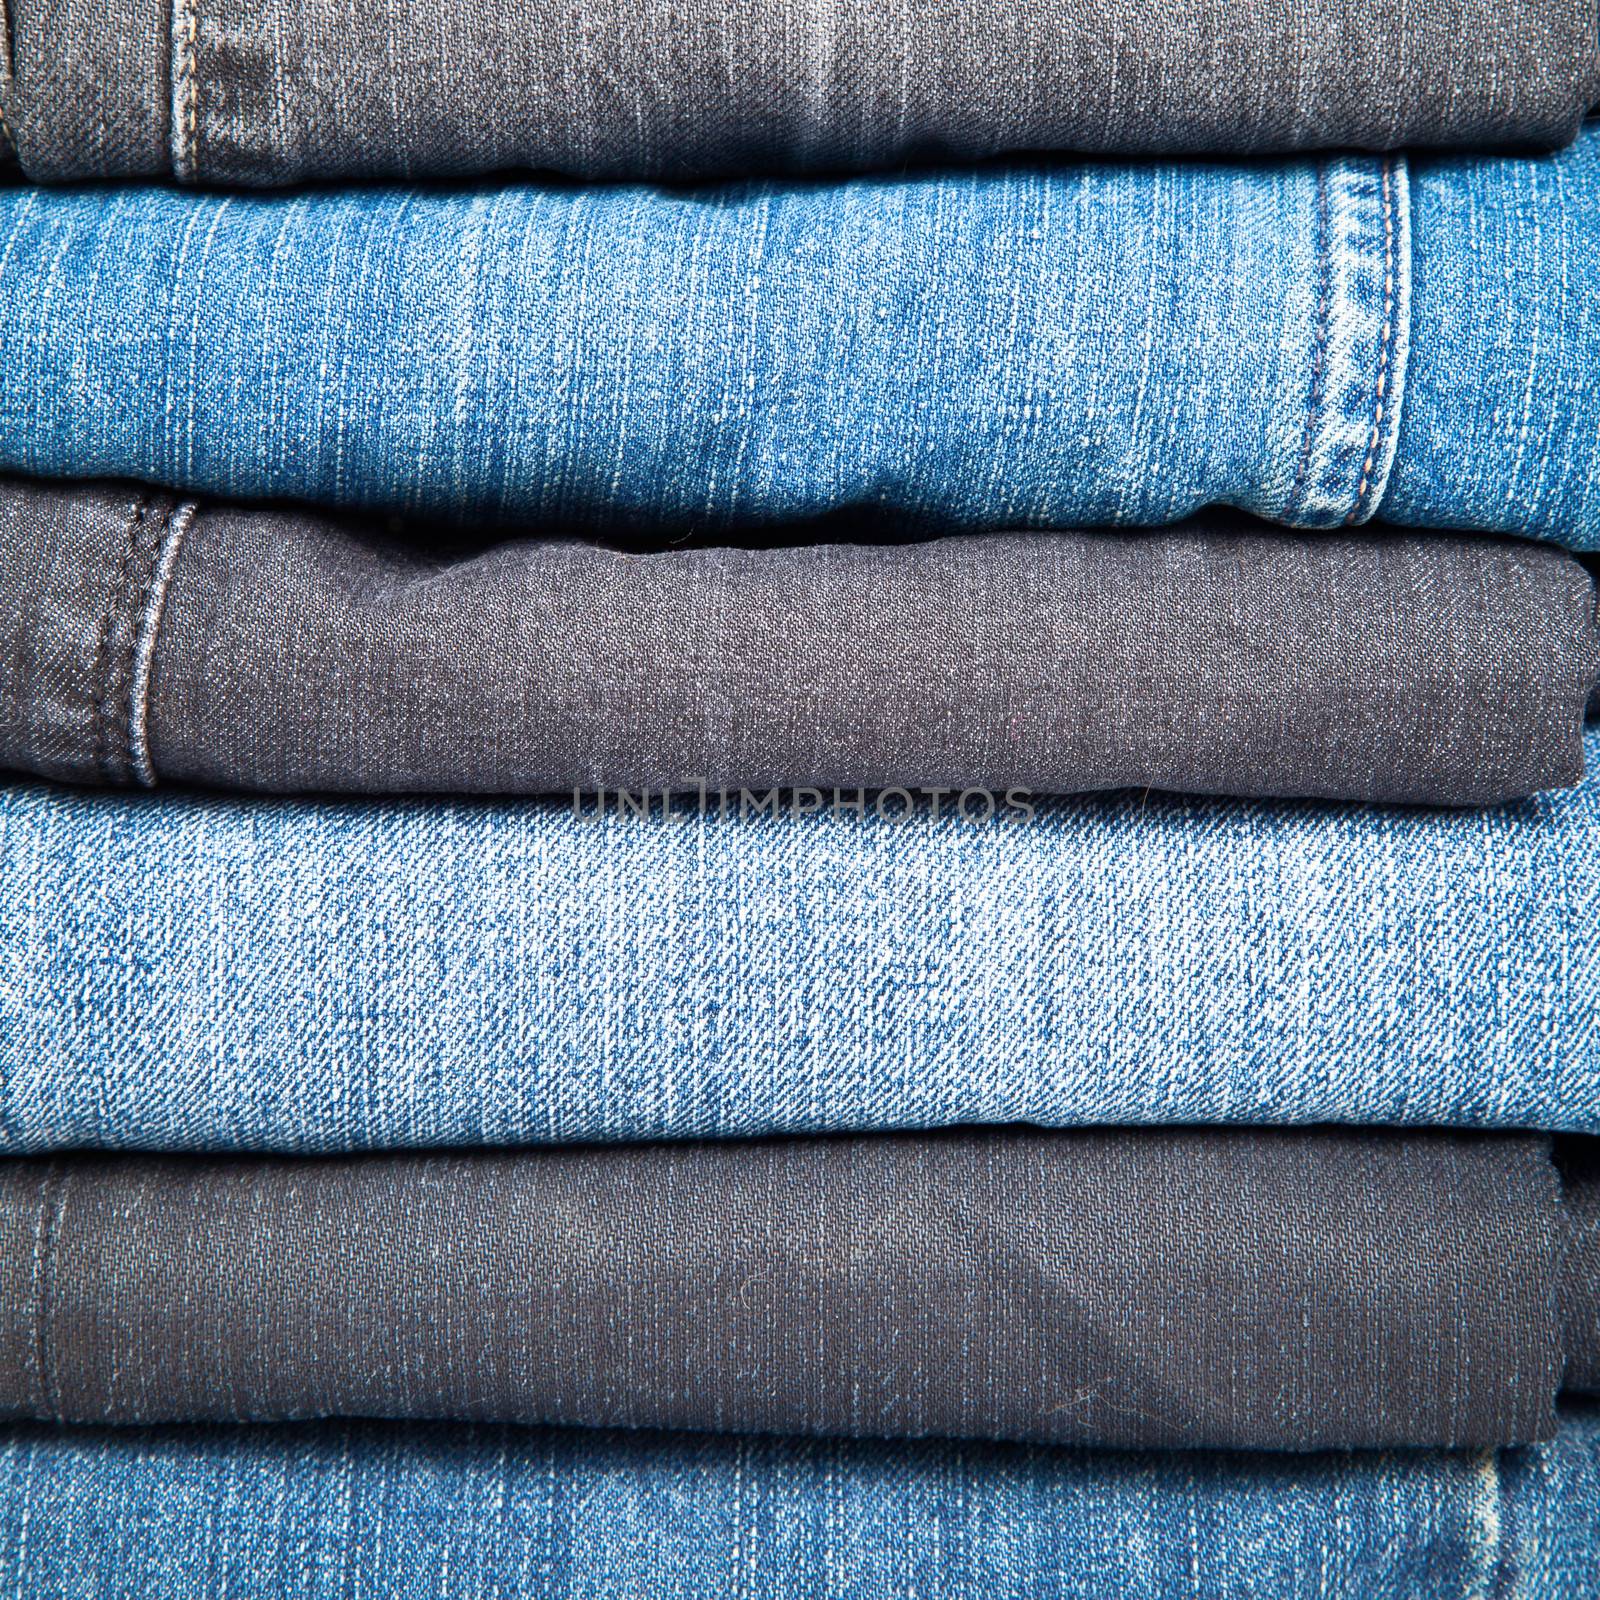 Jeans pile by naumoid